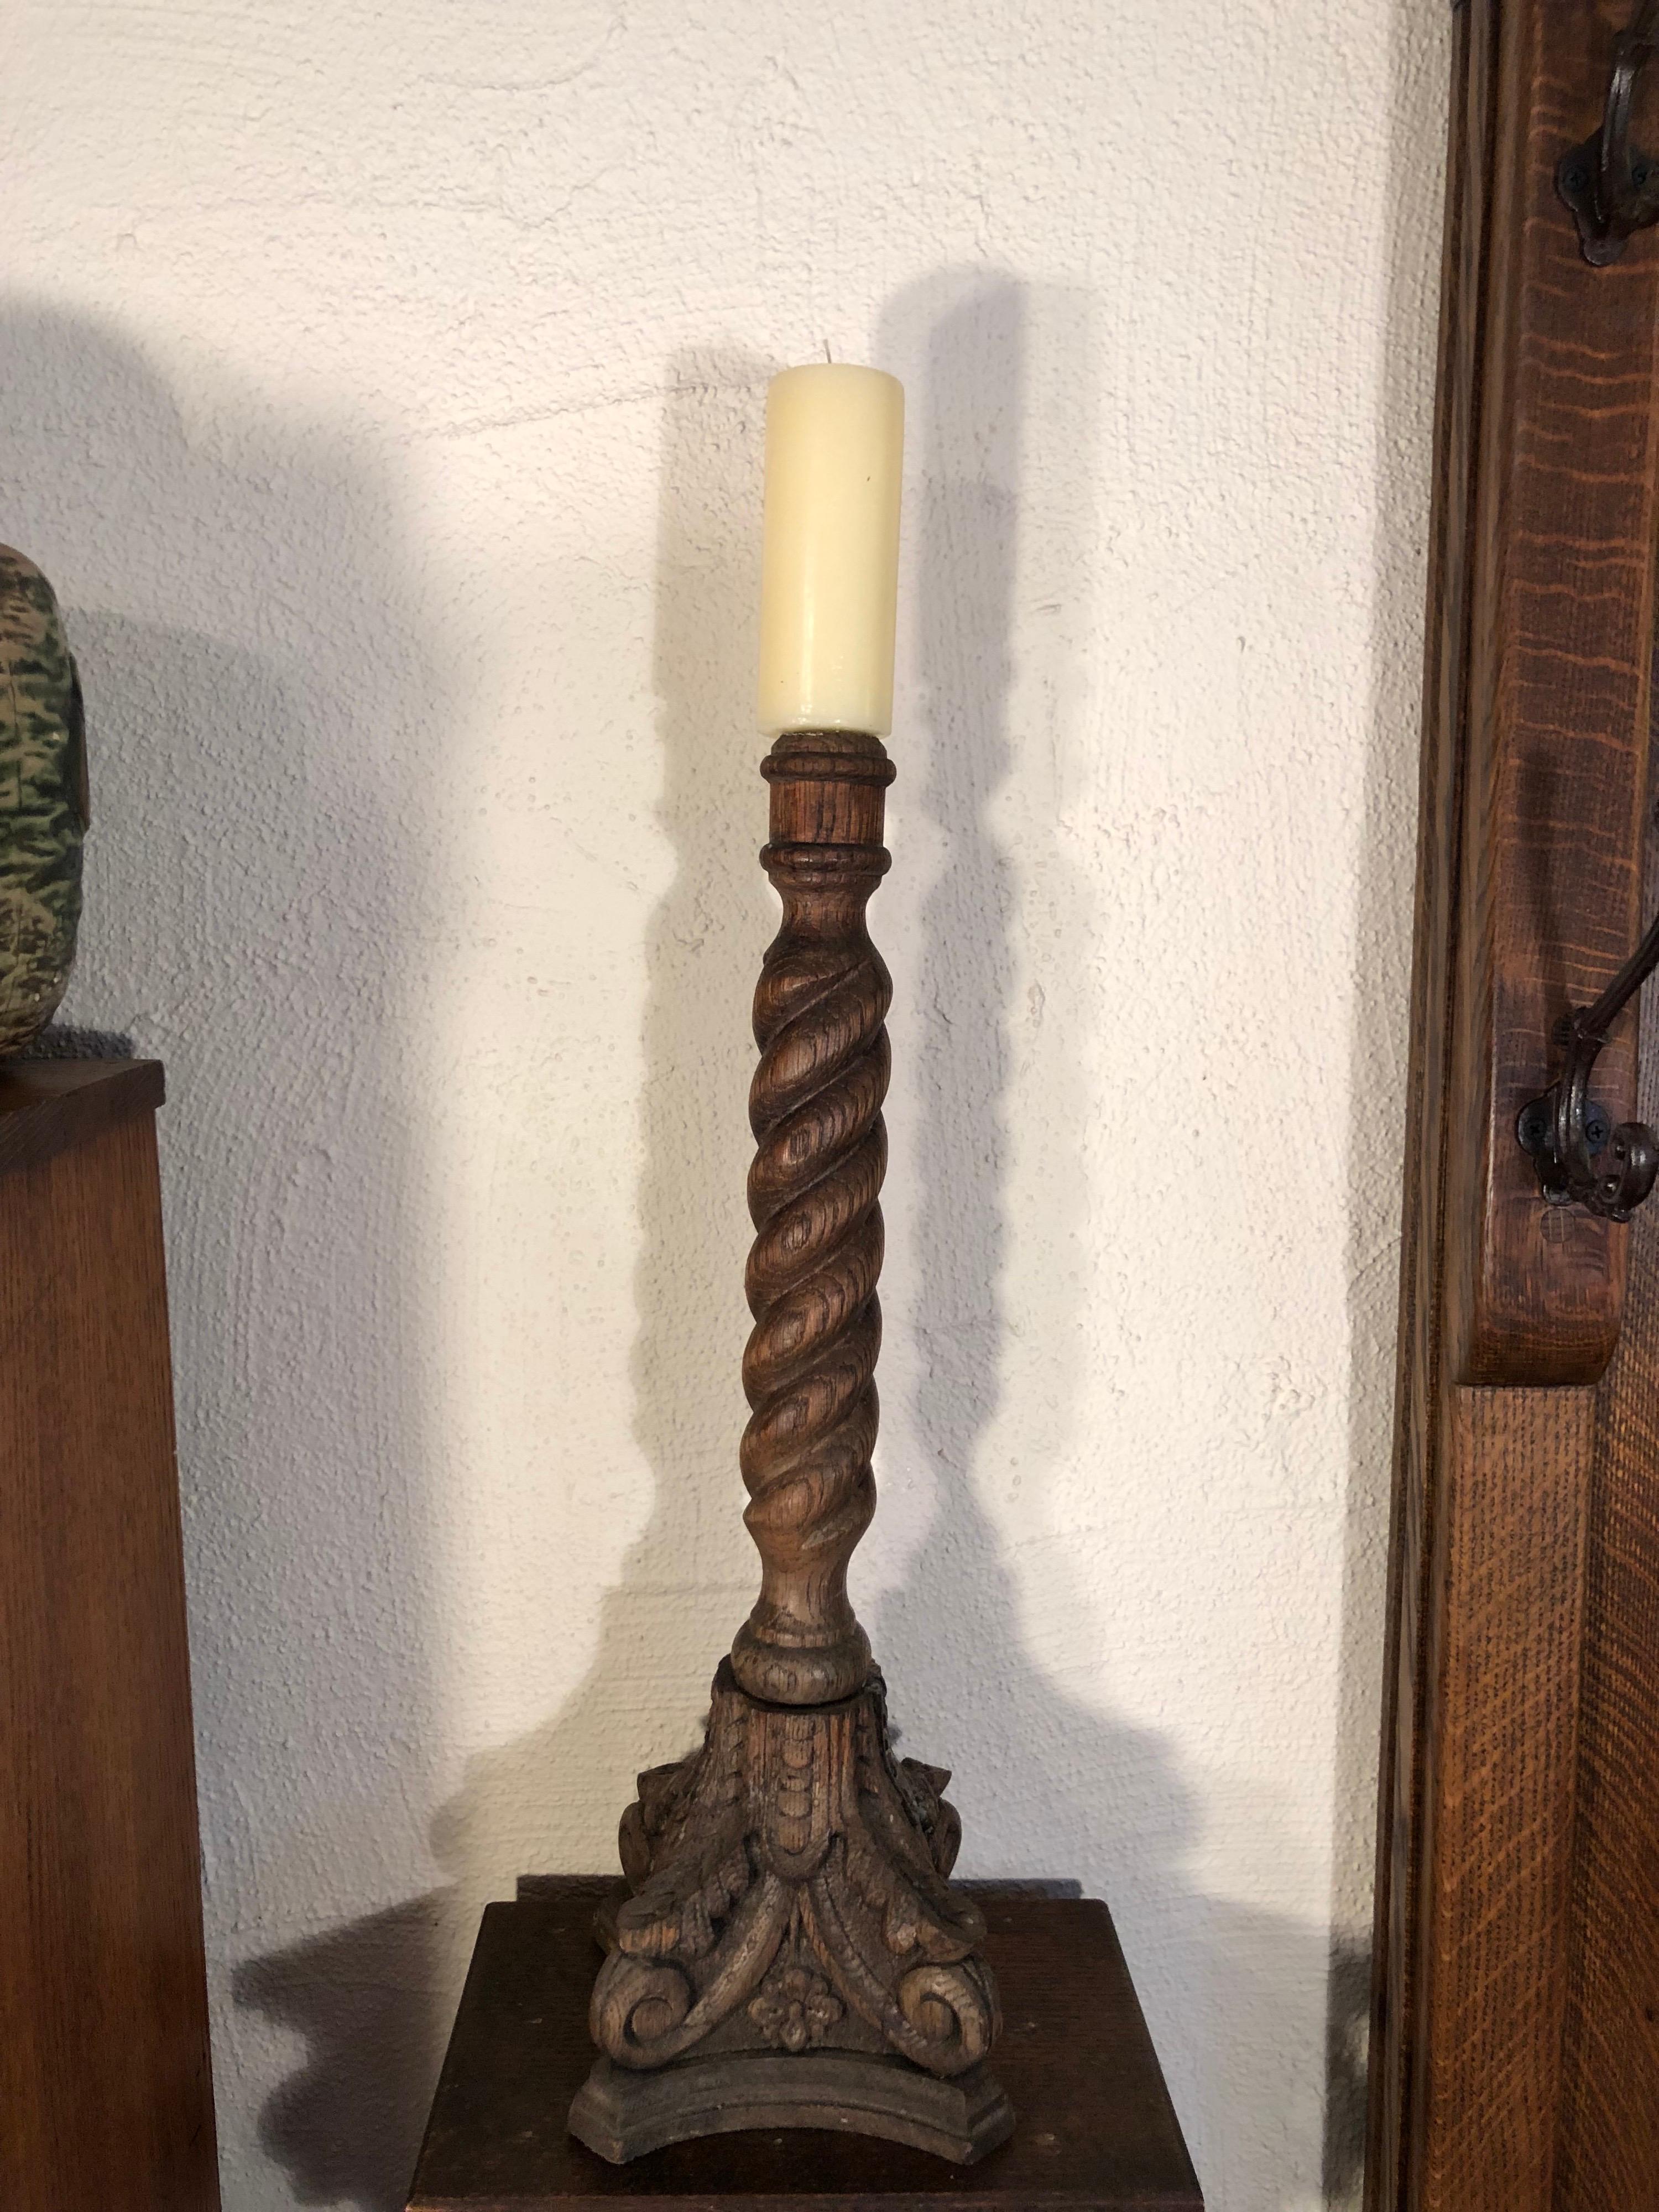 Carved oak barley twist candlestick. Columned base with heavily detailed carvings. Nice addition to any arts and crafts home. This item will parcel ship for $45.